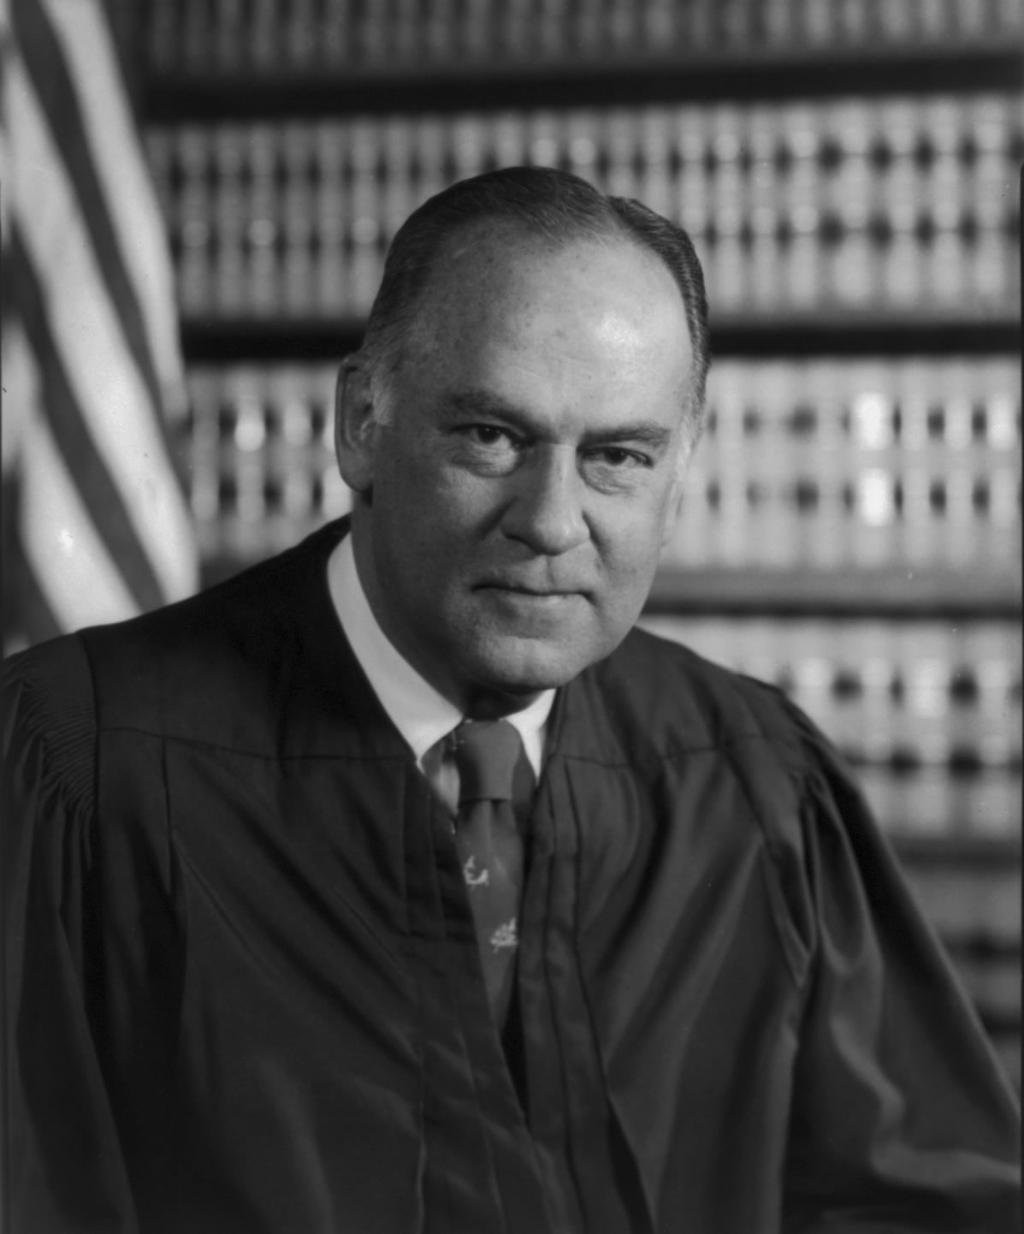 + ANOTHER ROLE MODEL I KNOW IT WHEN I SEE IT -Potter Stewart, US Supreme Court 1959-1981 + REAL-LIFE CHALLENGE: DEEP SEDATION n A traveling RN in the Emergency Room refuses to push propofol for a